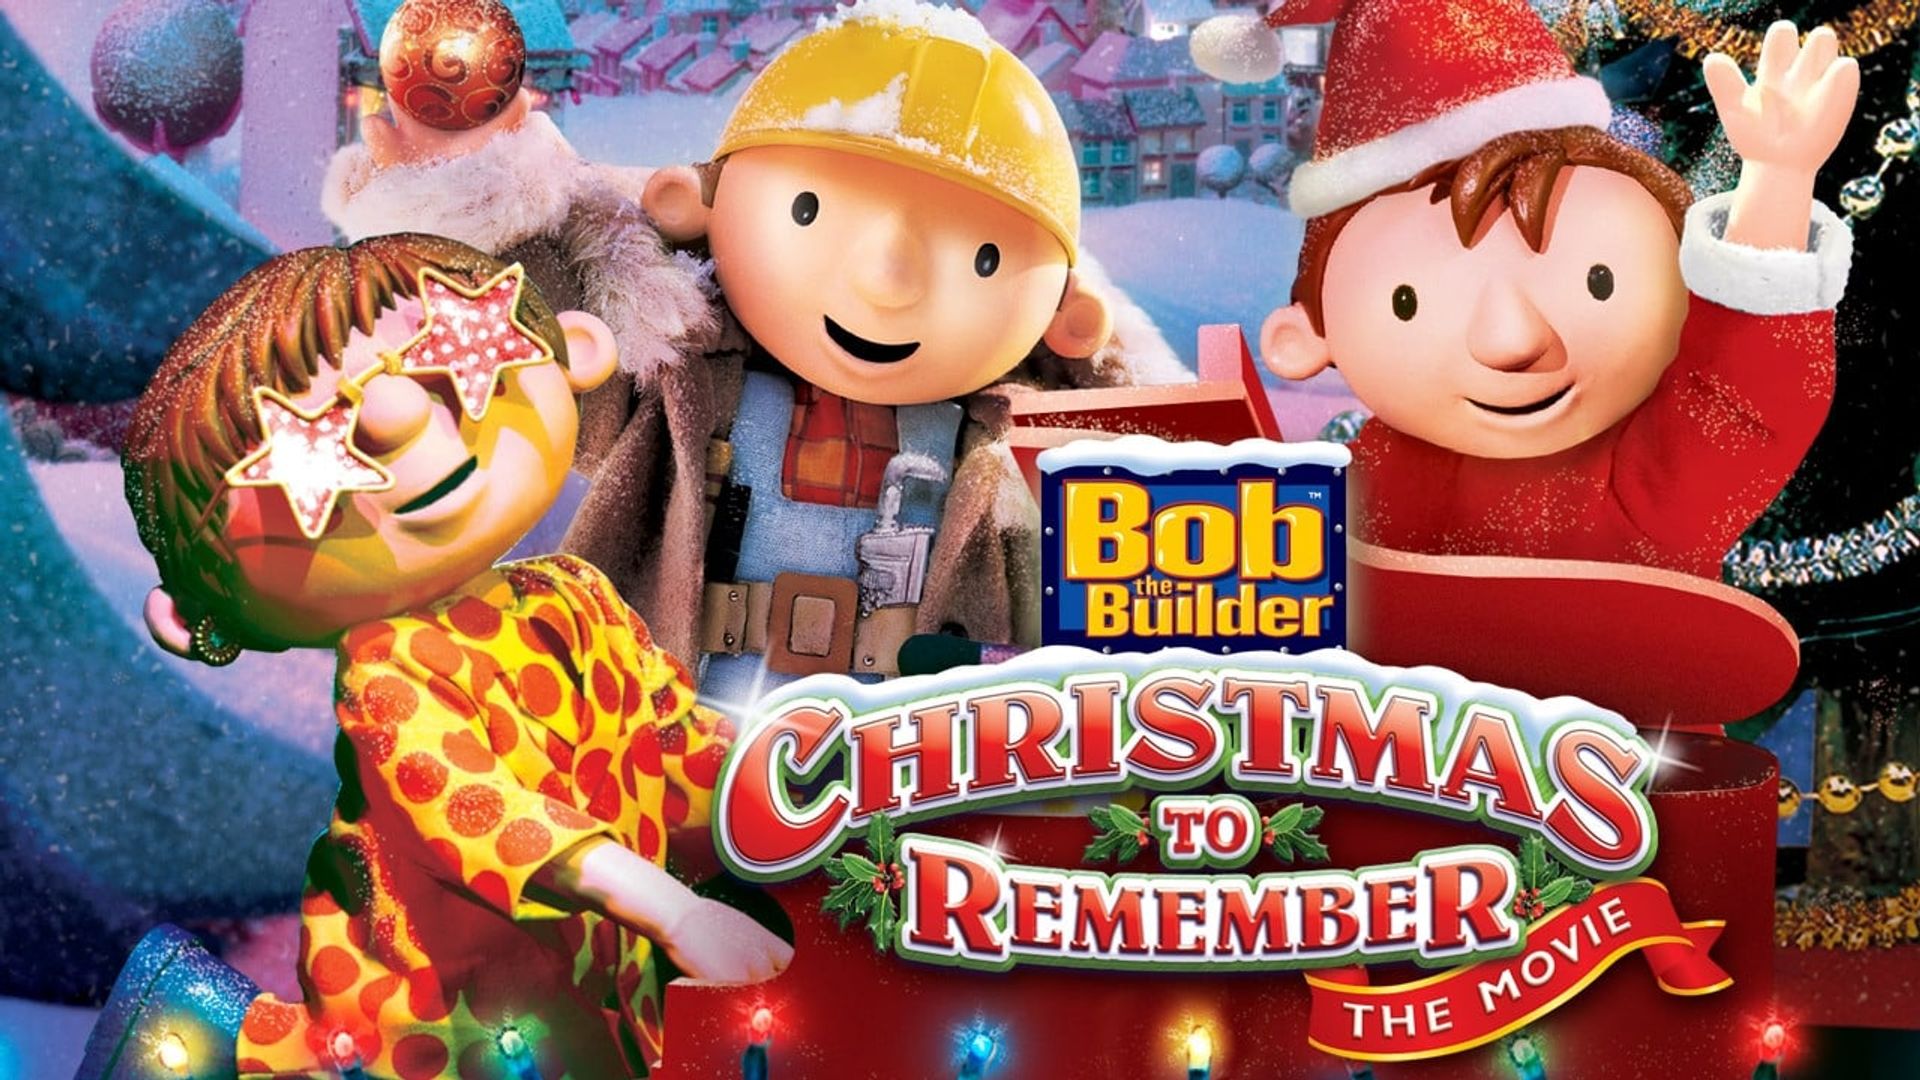 Bob the Builder: A Christmas to Remember background